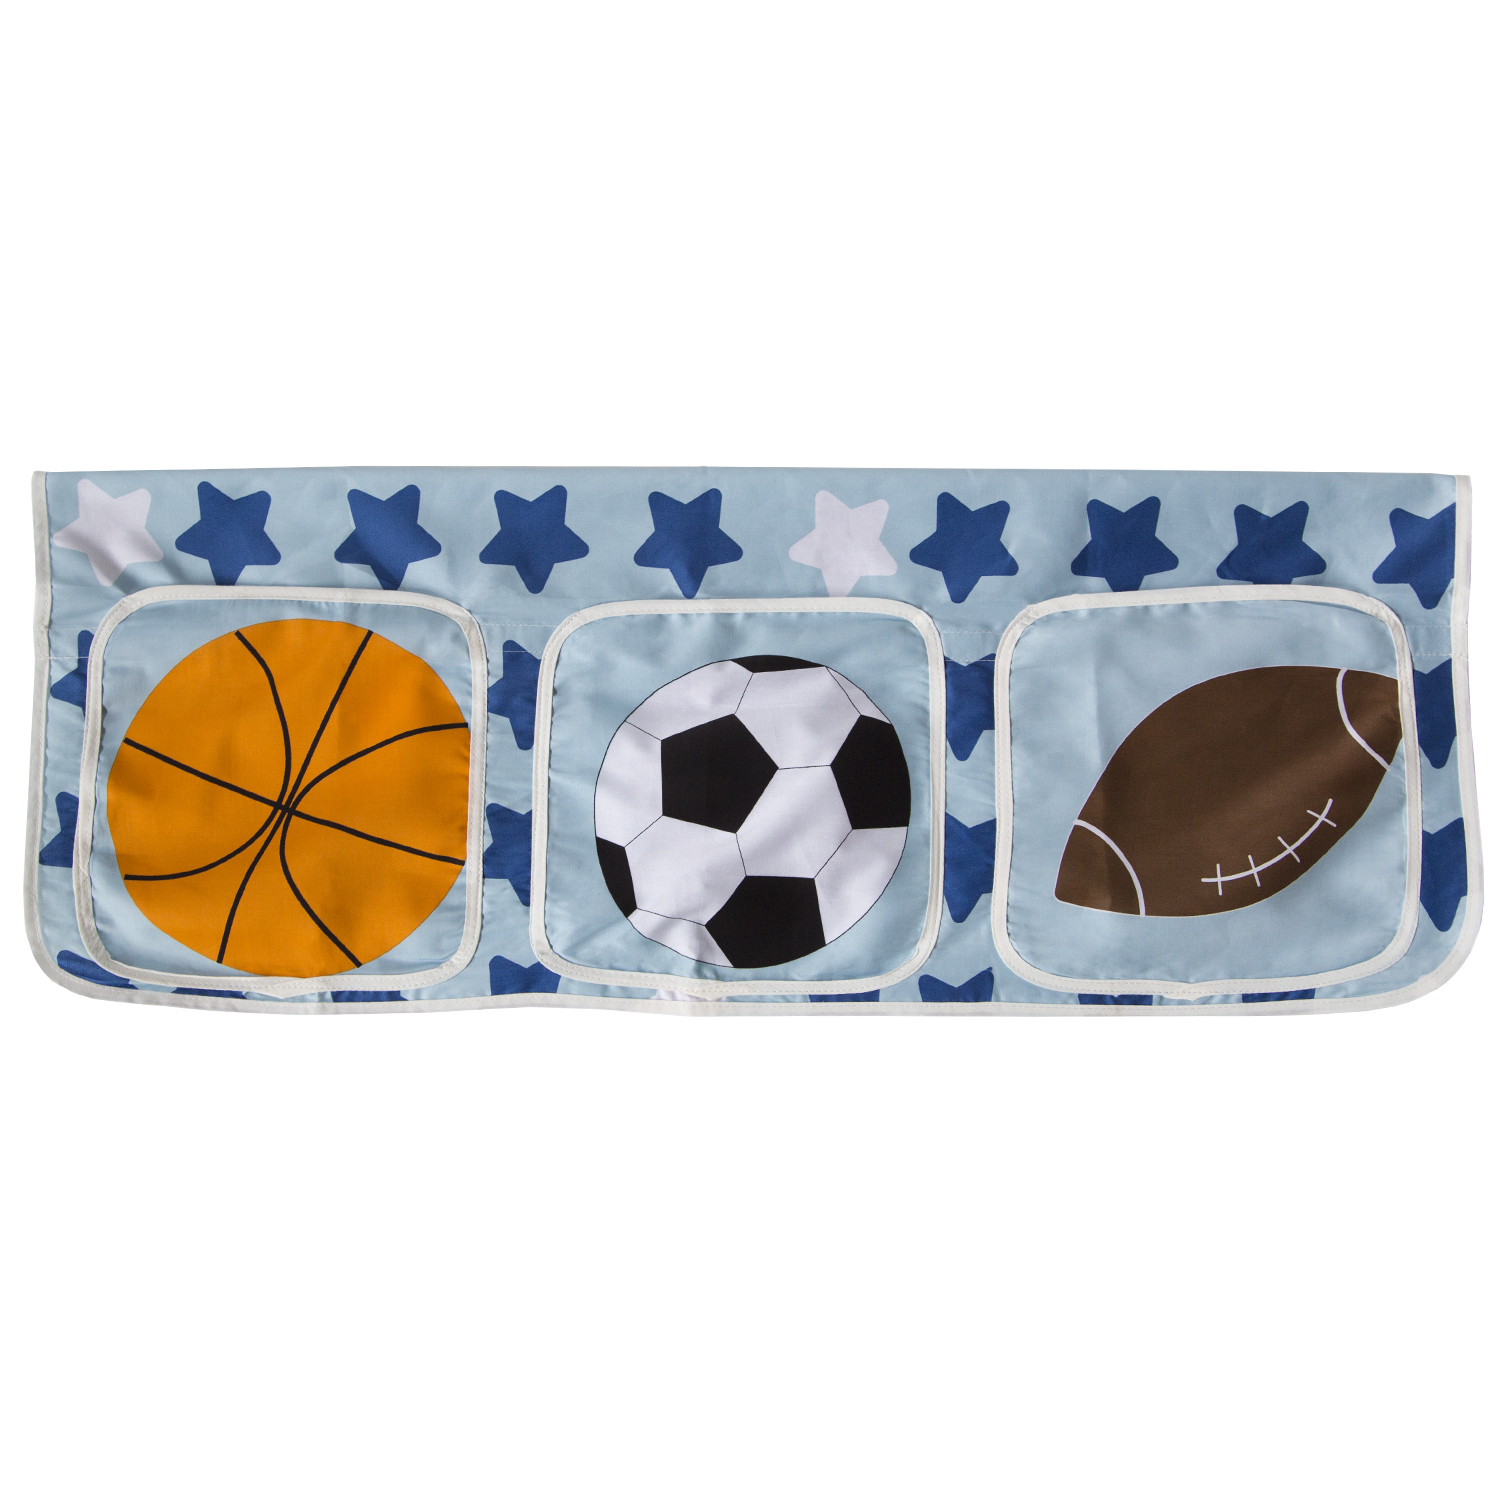 Bedding Bunk Bed Cloth Bag Cot Bed Accessories Children´s Bed Blue Football